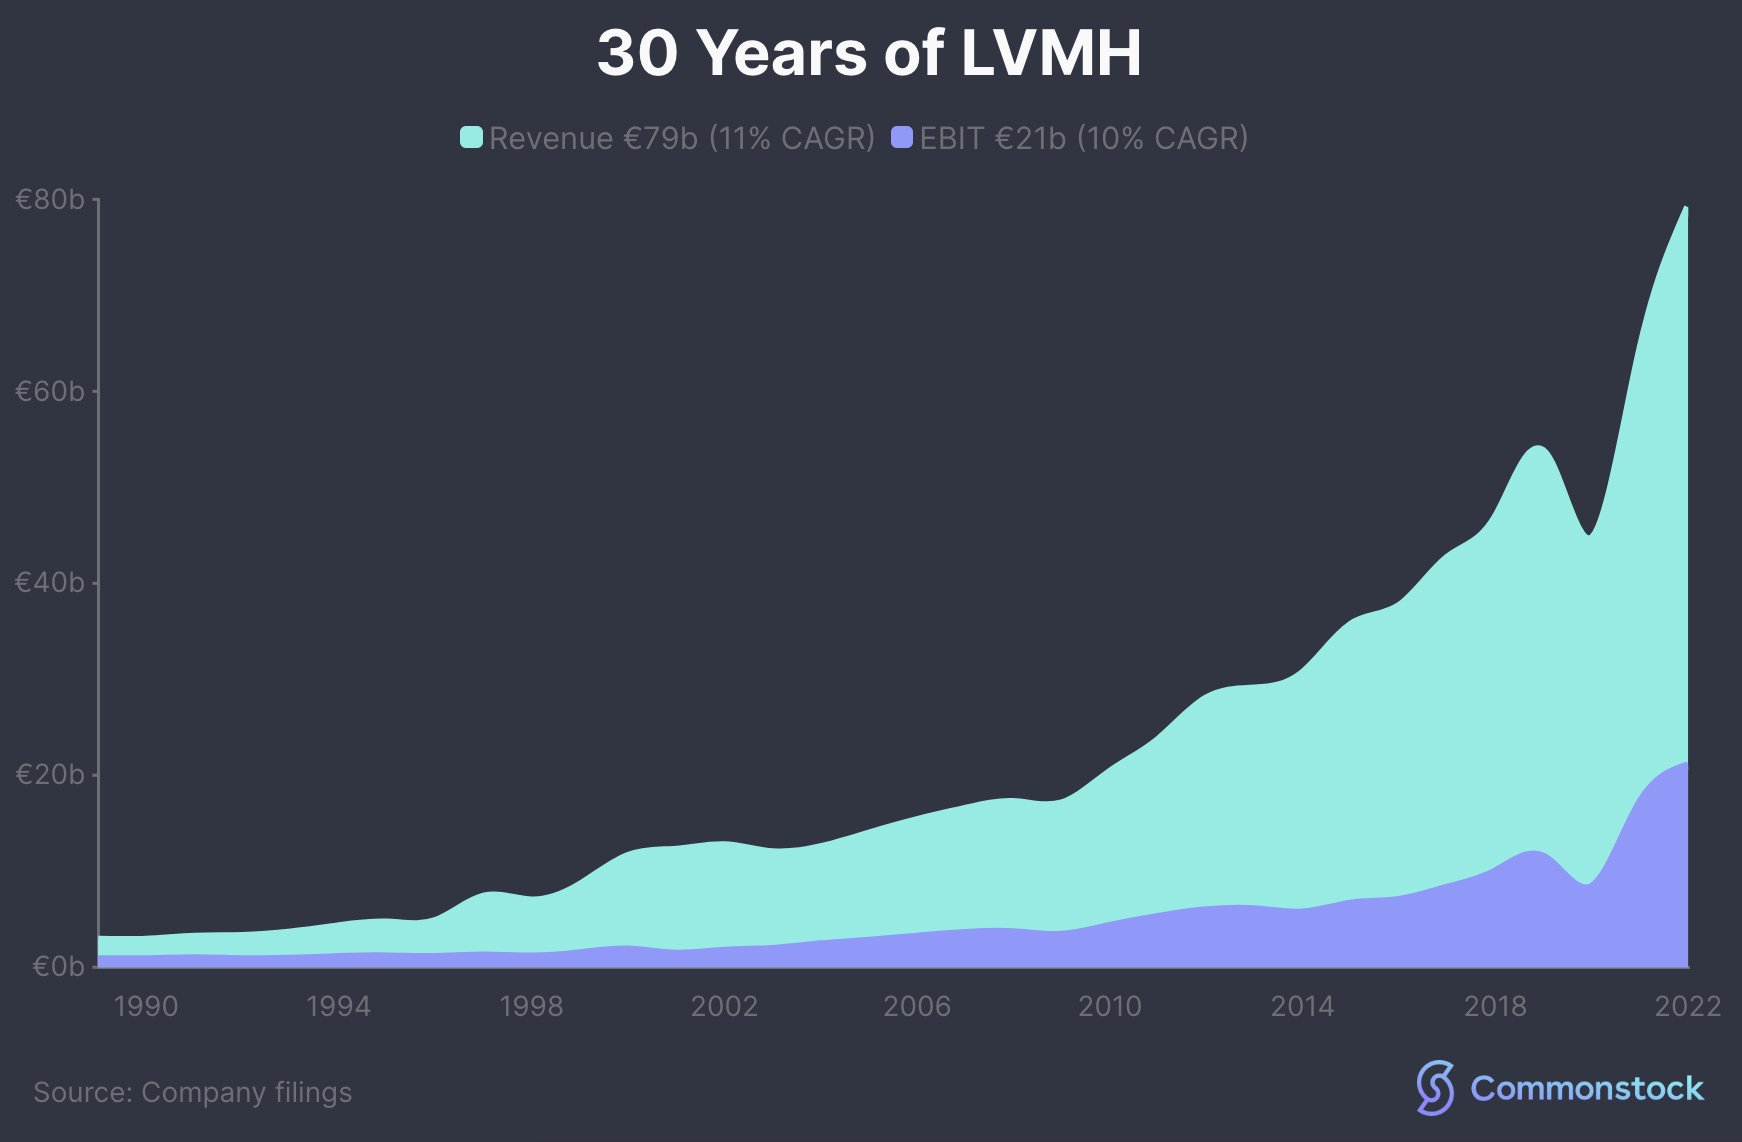 Commonstock on X: $LVMH The illusion of choice in the luxury